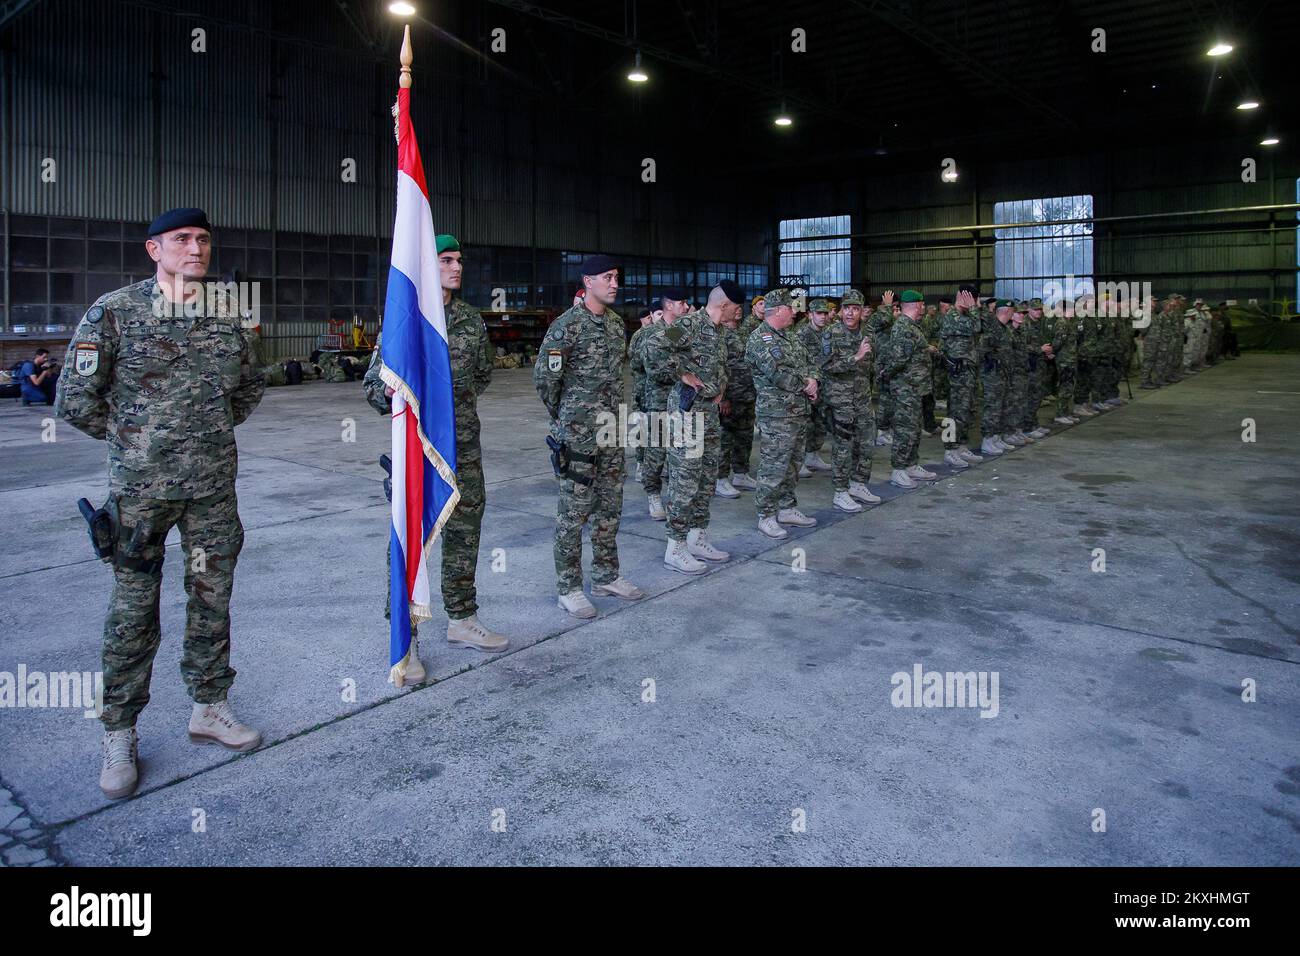 Ceremonial reception of the 12th Croatian contingent from the Resolute Support peacekeeping mission in Afghanistan was held at Pleso airport in the barracks of the 91st Wing of the Croatian Air Force in Zagreb, Croatia on 15. September, 2020. Photo: Davor Puklavec/PIXSELL  Stock Photo